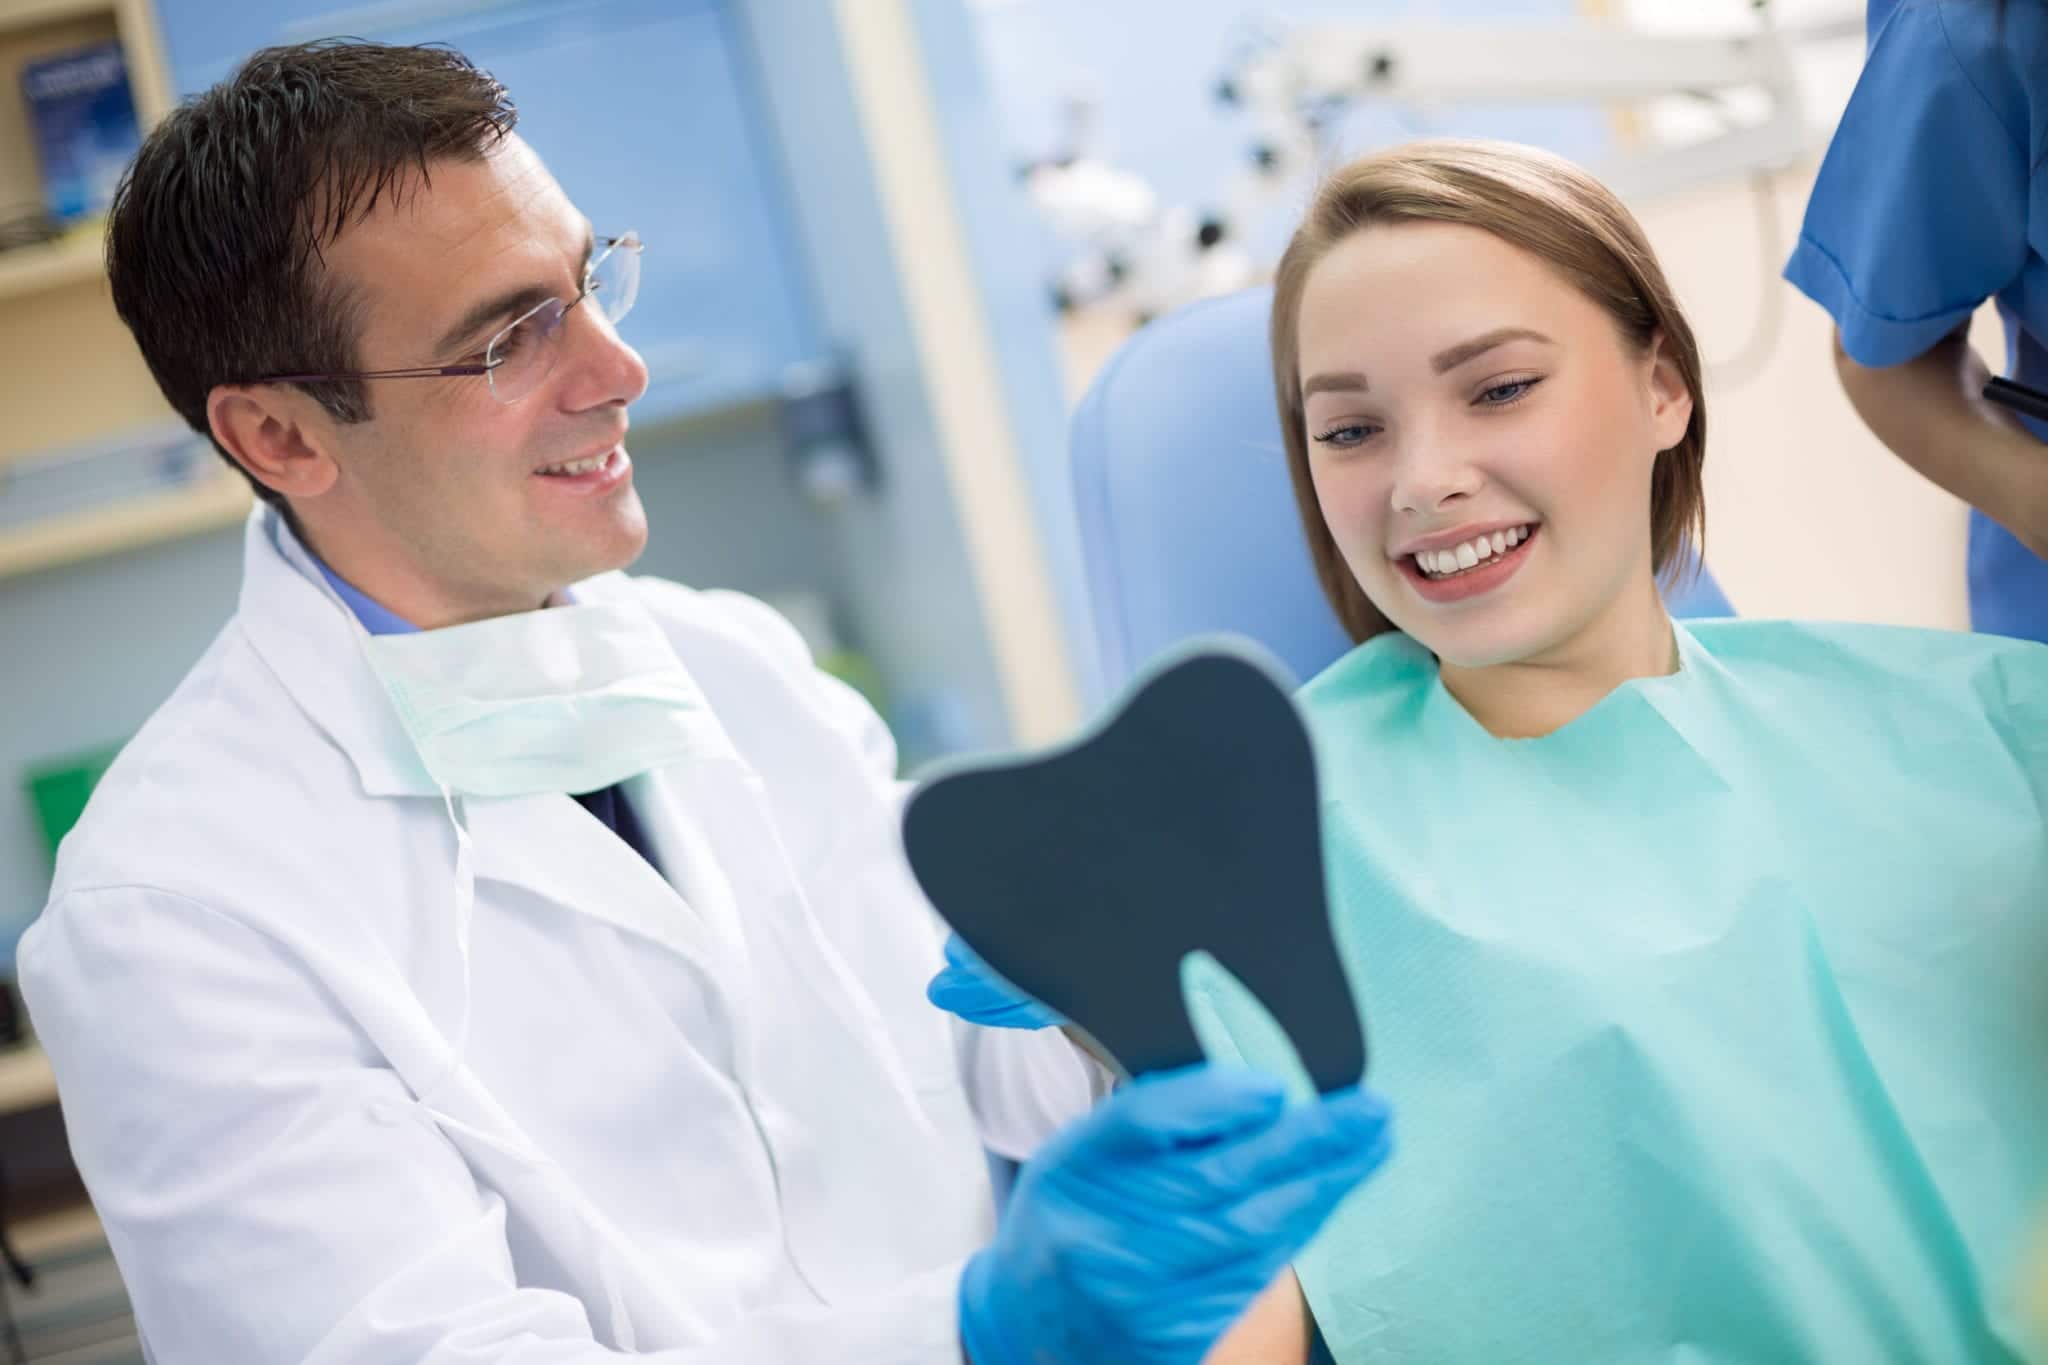 Questions to Ask During Your Dental Checkup